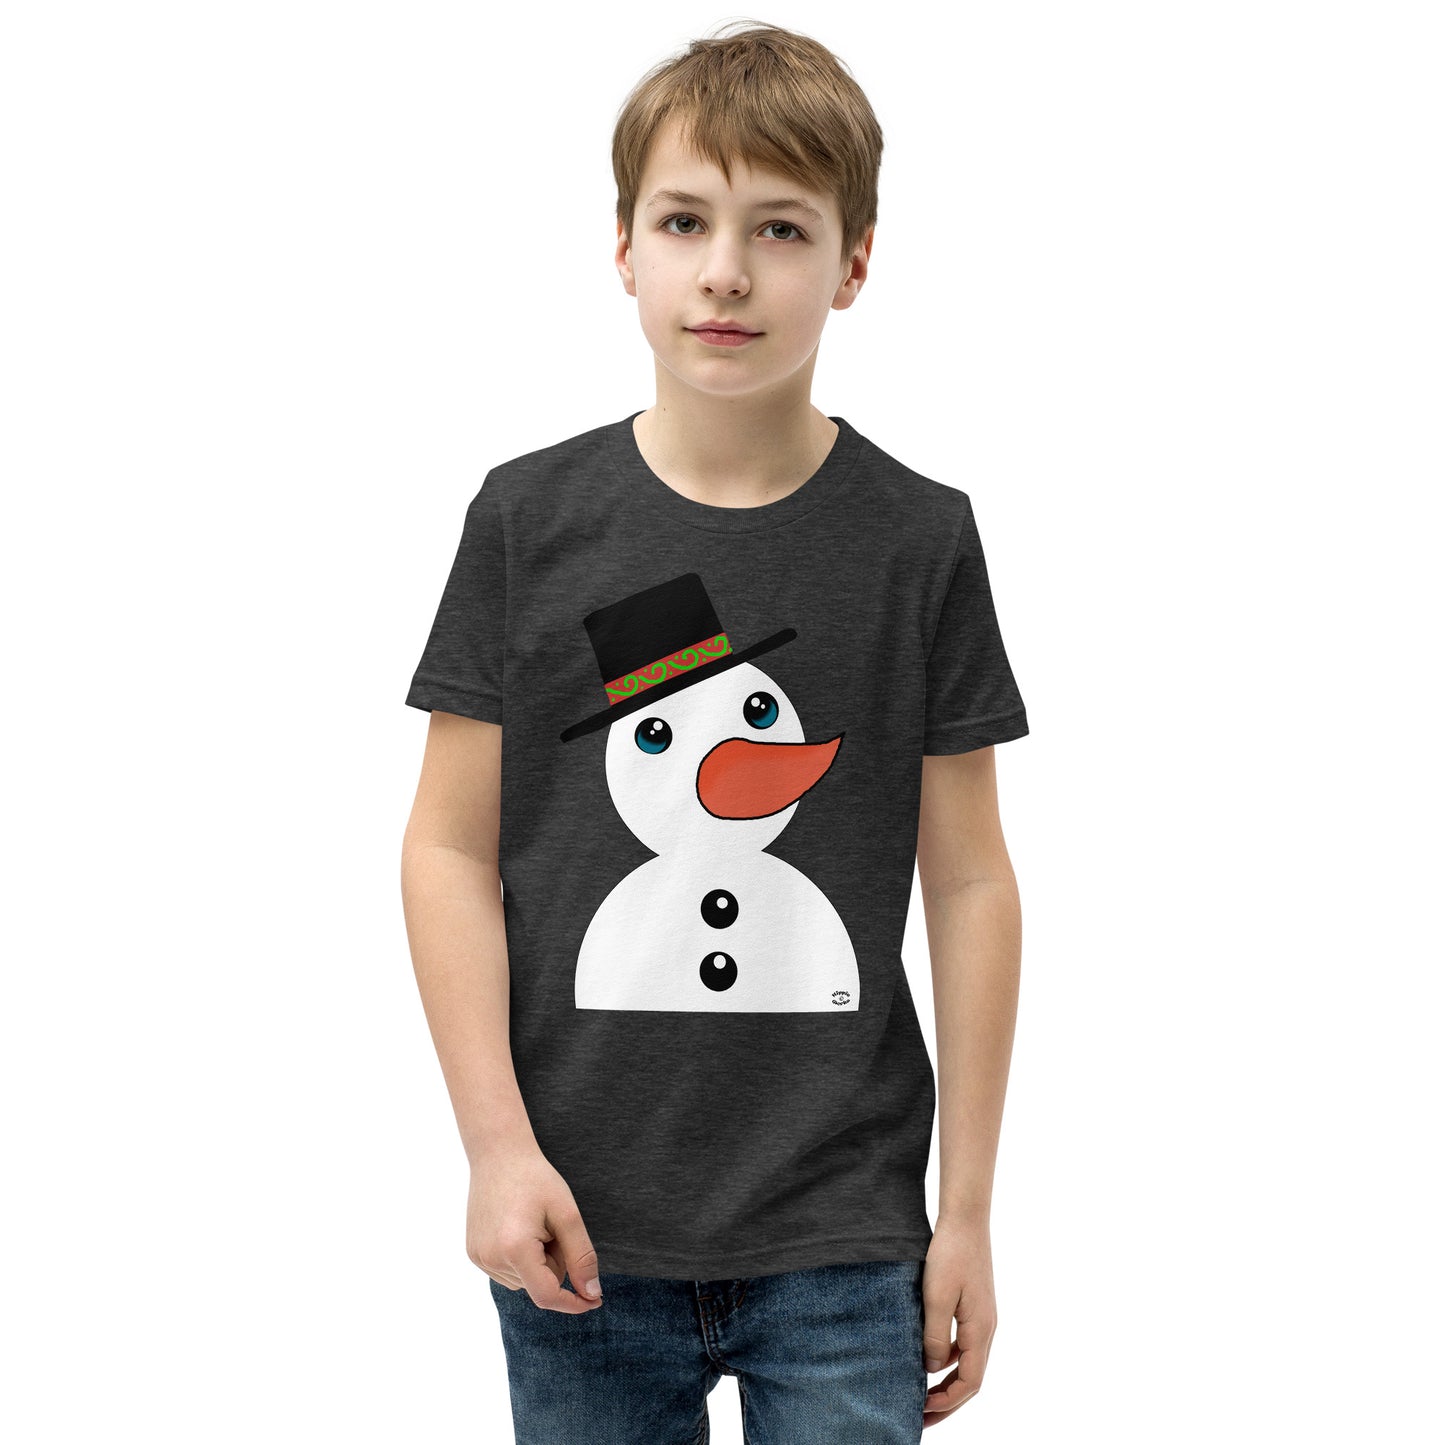 "The Snowman" Youth Short Sleeve T-Shirt